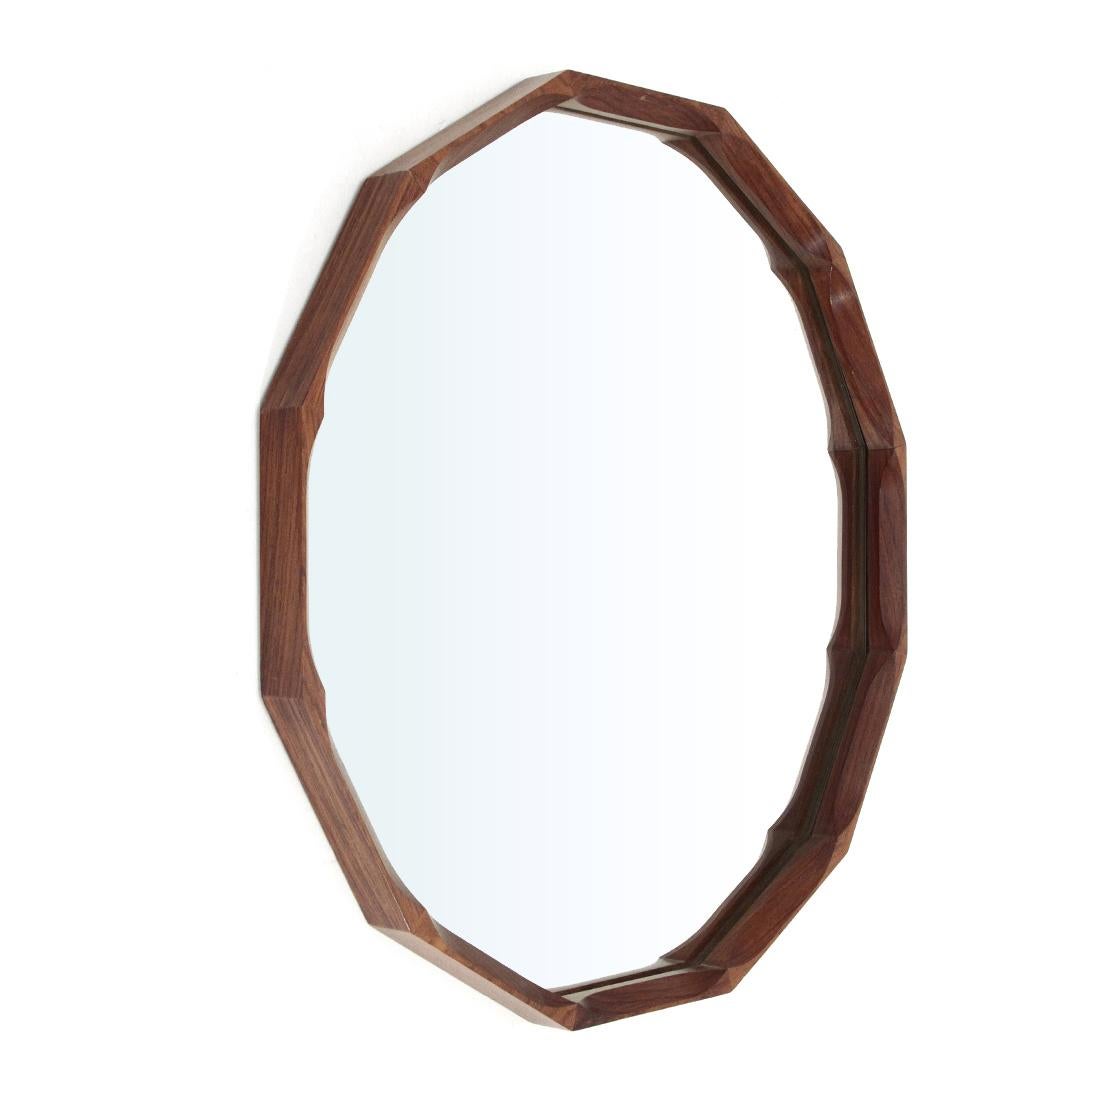 Italian Mirror with Twelve-Sided Frame by Tredici, 1960s